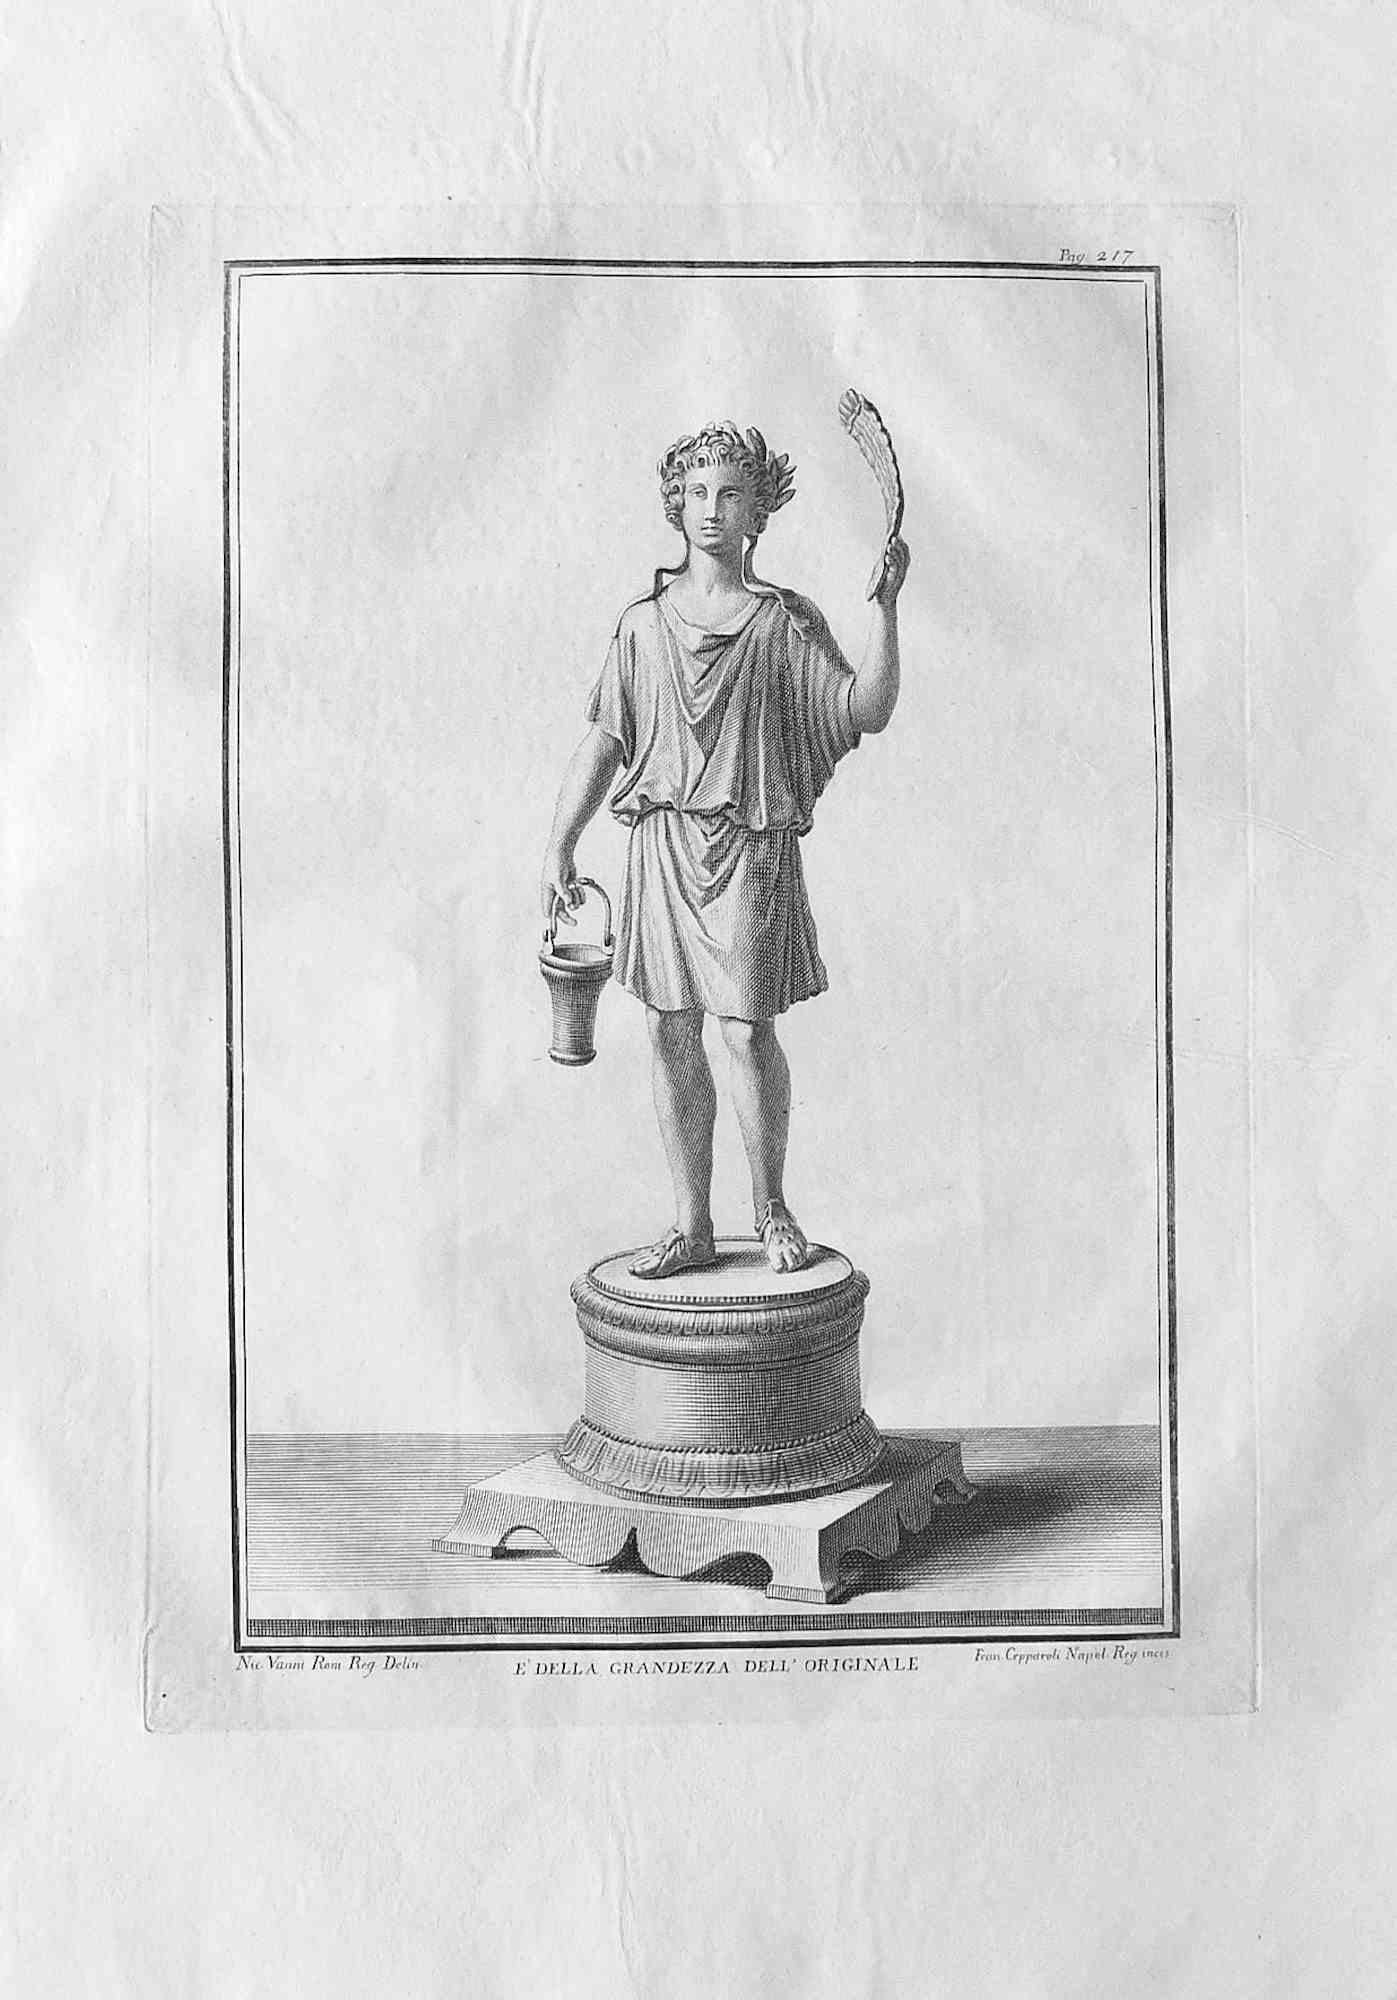 Ancient Roman Statue, from the series "Antiquities of Herculaneum", is an original etching on paper realized by Francesco Cepparuli in the 18th century.

Signed on the plate on the lower right

Good conditions but aged.

The etching belongs to the